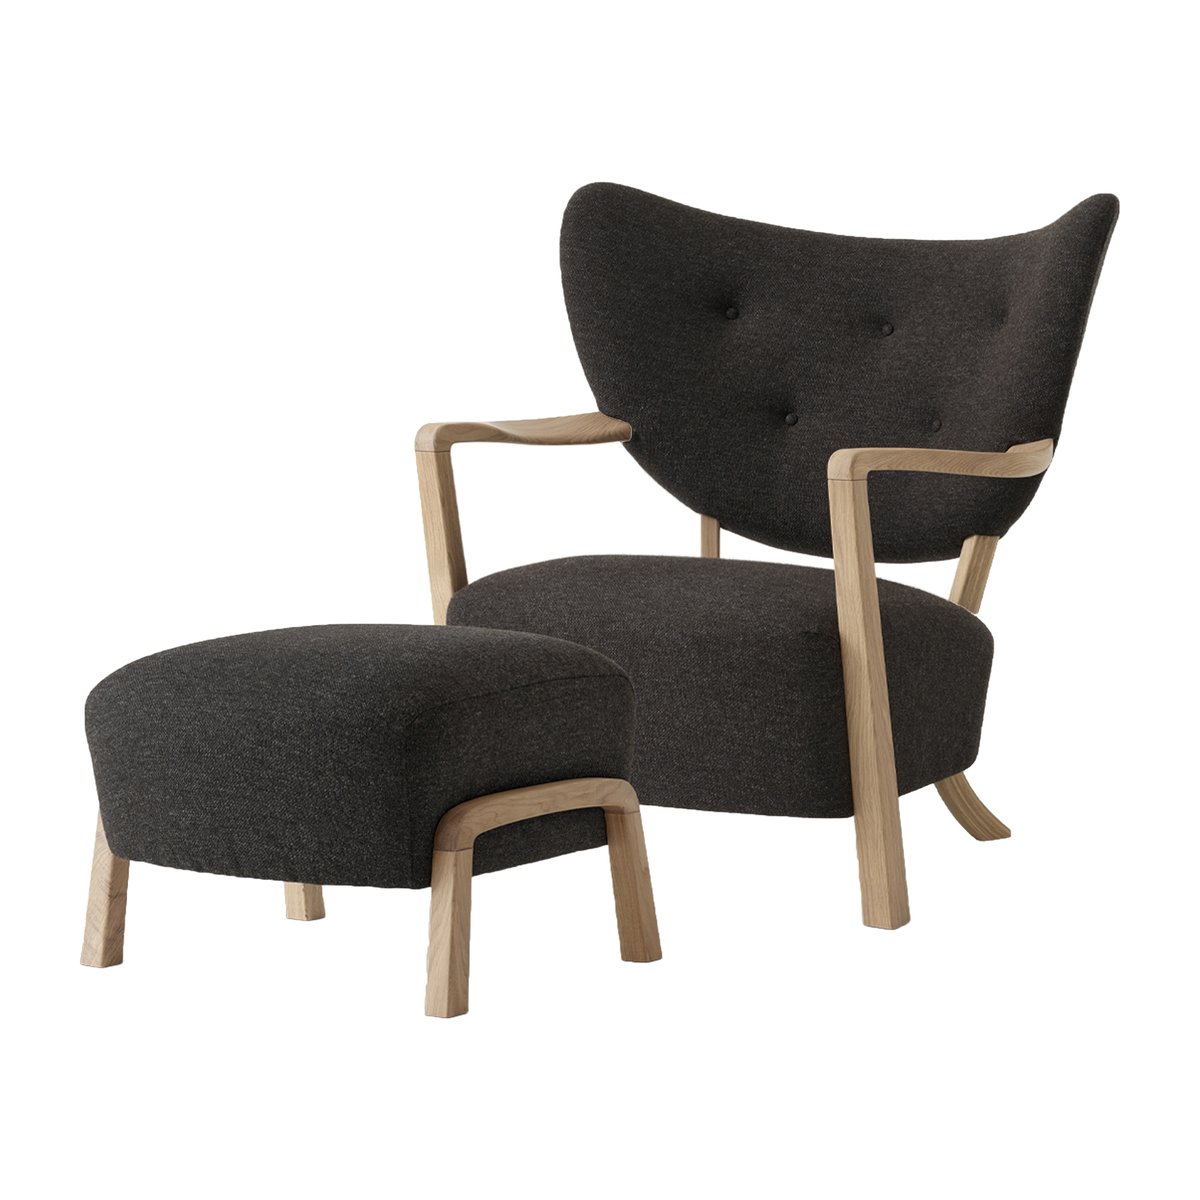 &Tradition Wulff Lounge Chair ATD2 fauteuil incl. poef ATD3 Geolied eikenhout-Hallingdal